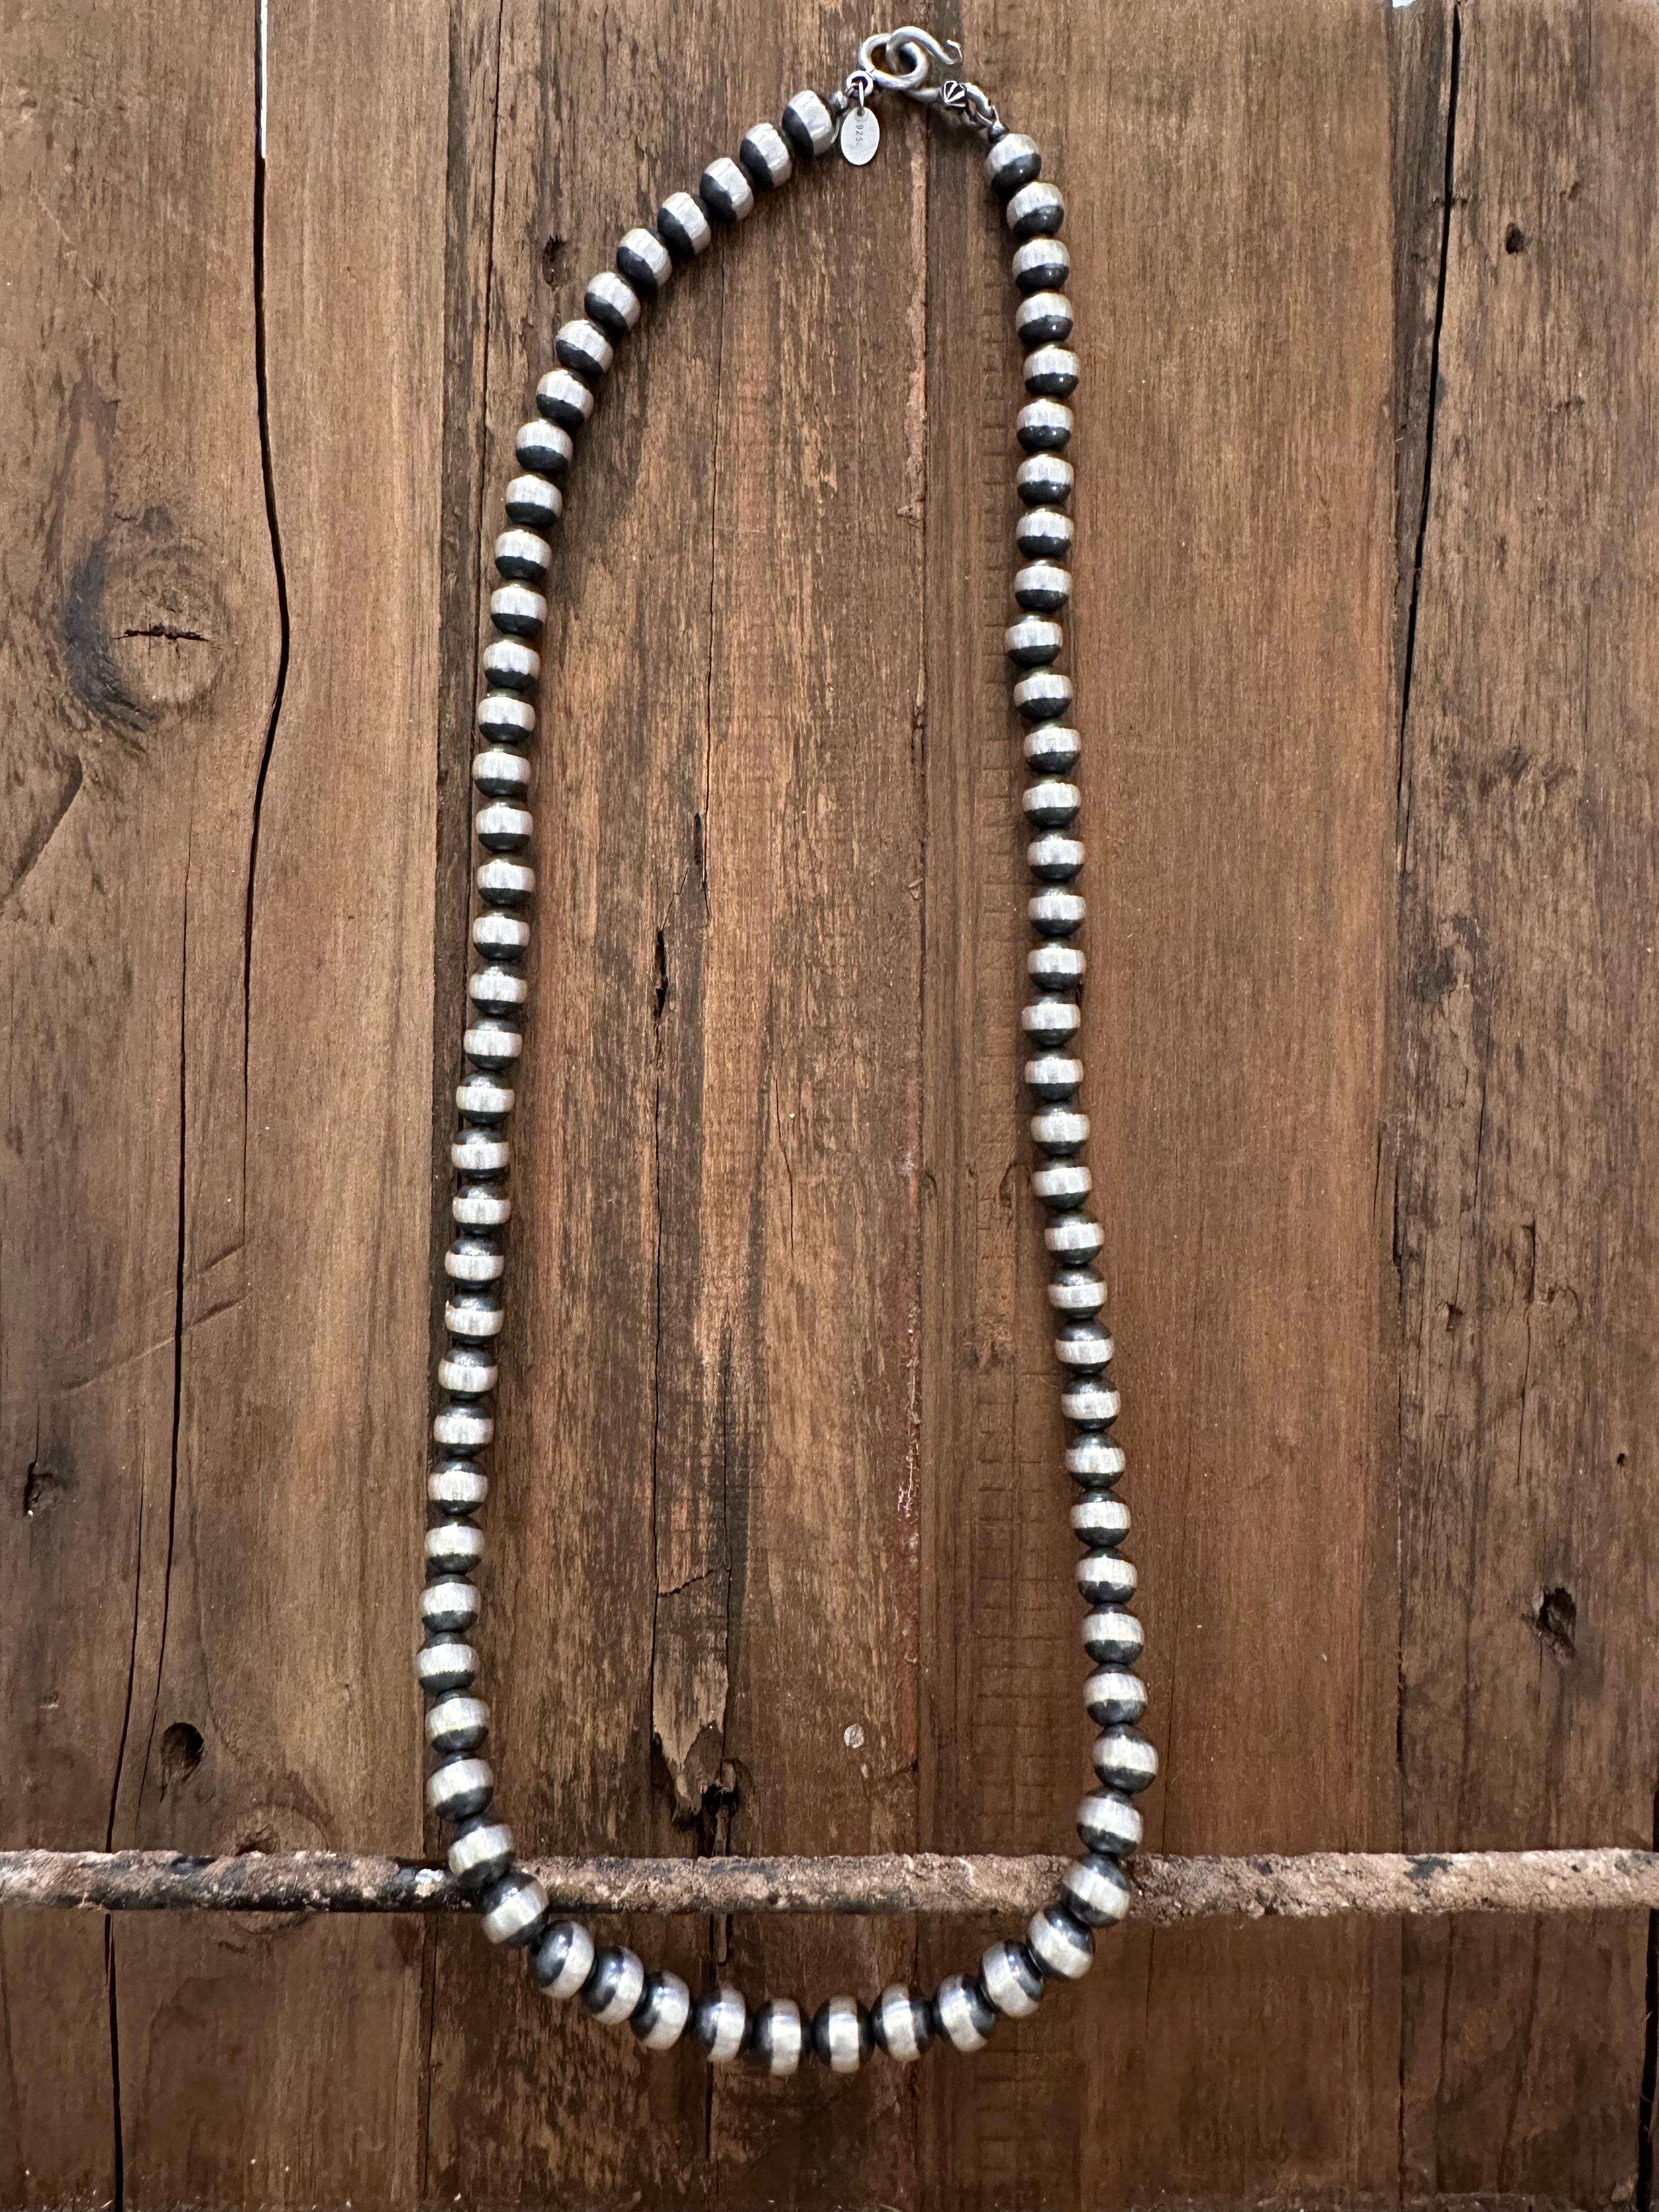 8mm Cowgirl Pearls